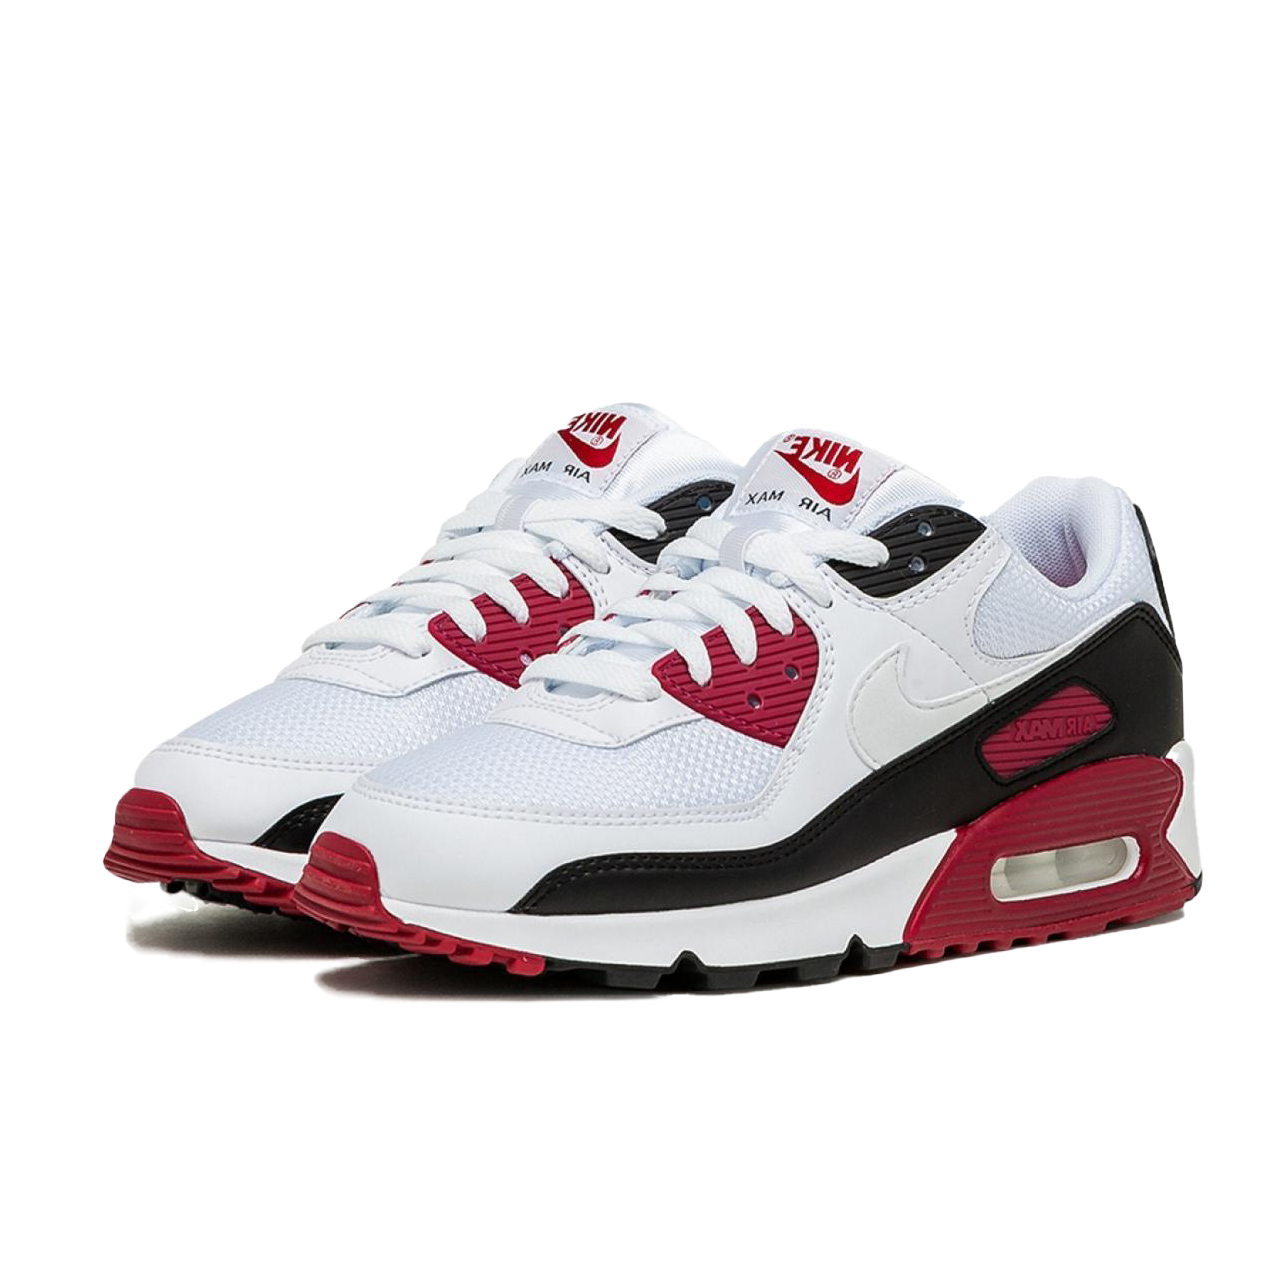 https://admin.thegioigiay.com/upload/product/2022/11/giay-the-thao-nike-air-max-2-light-habanero-red-size-40-5-6371cac395a20-14112022115739.png